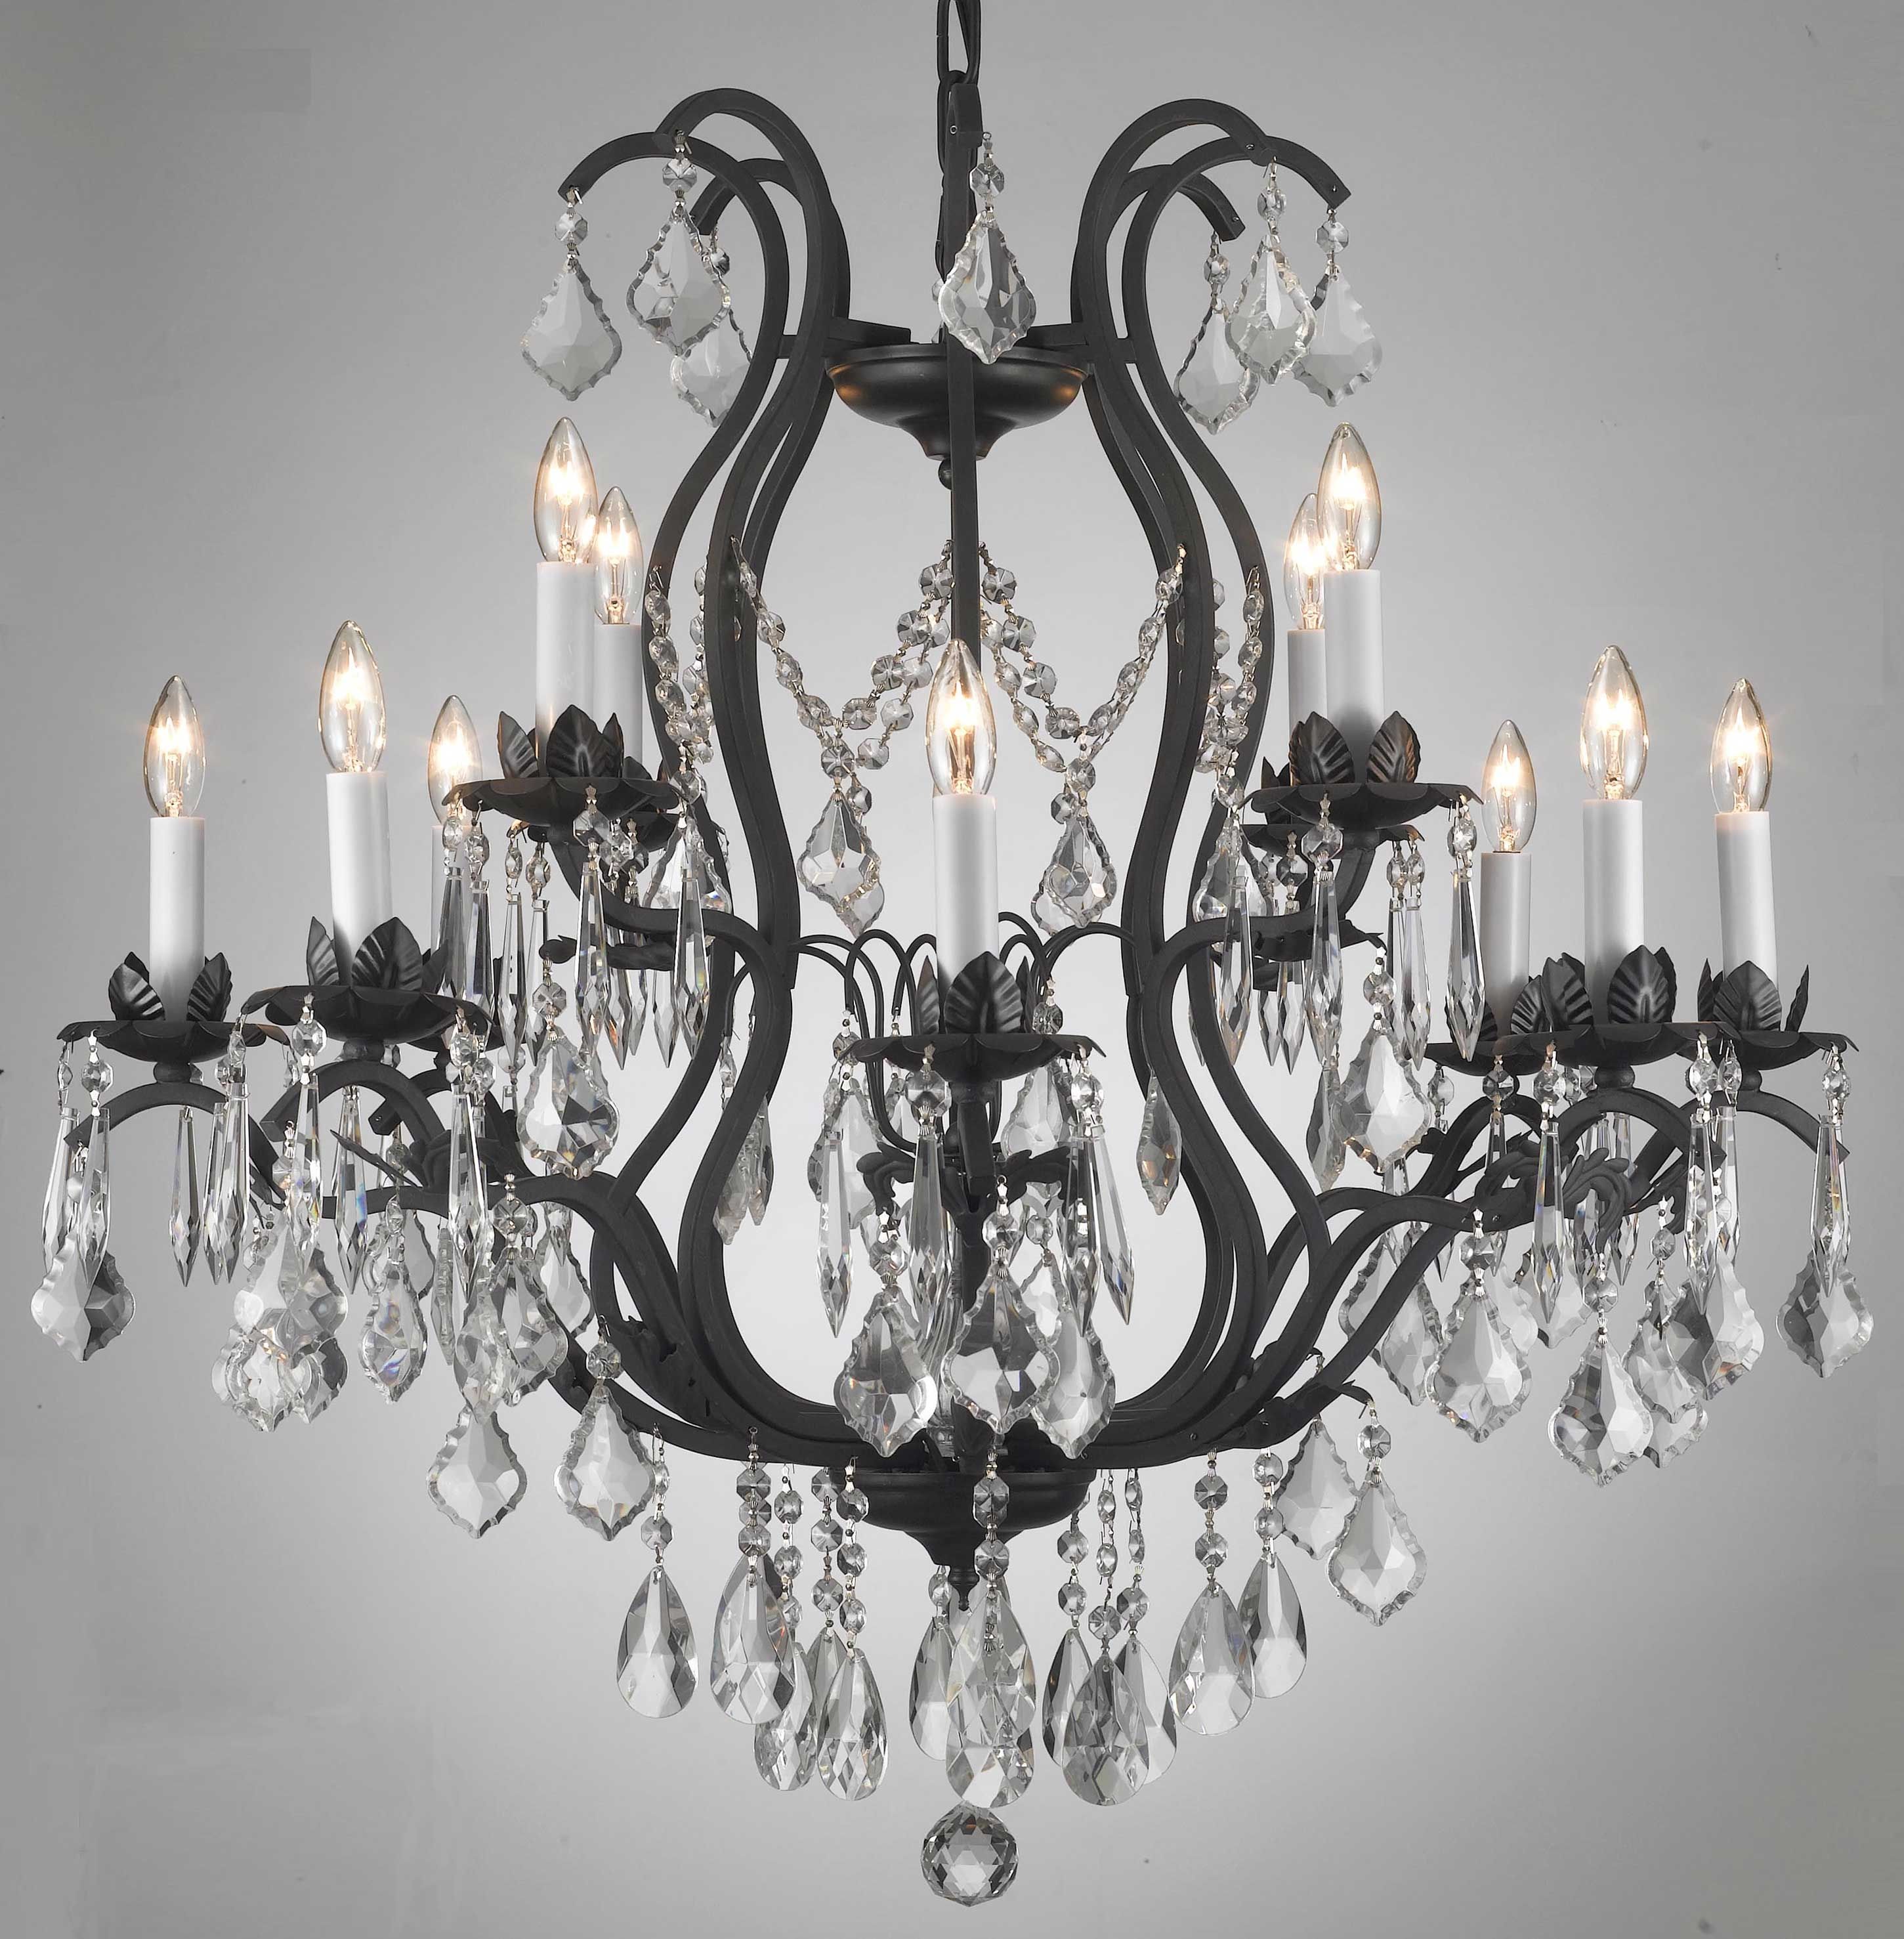 Chandelier Astounding Wrought Iron Chandeliers Lighting With Regard To Wrought Iron Chandeliers (View 5 of 12)